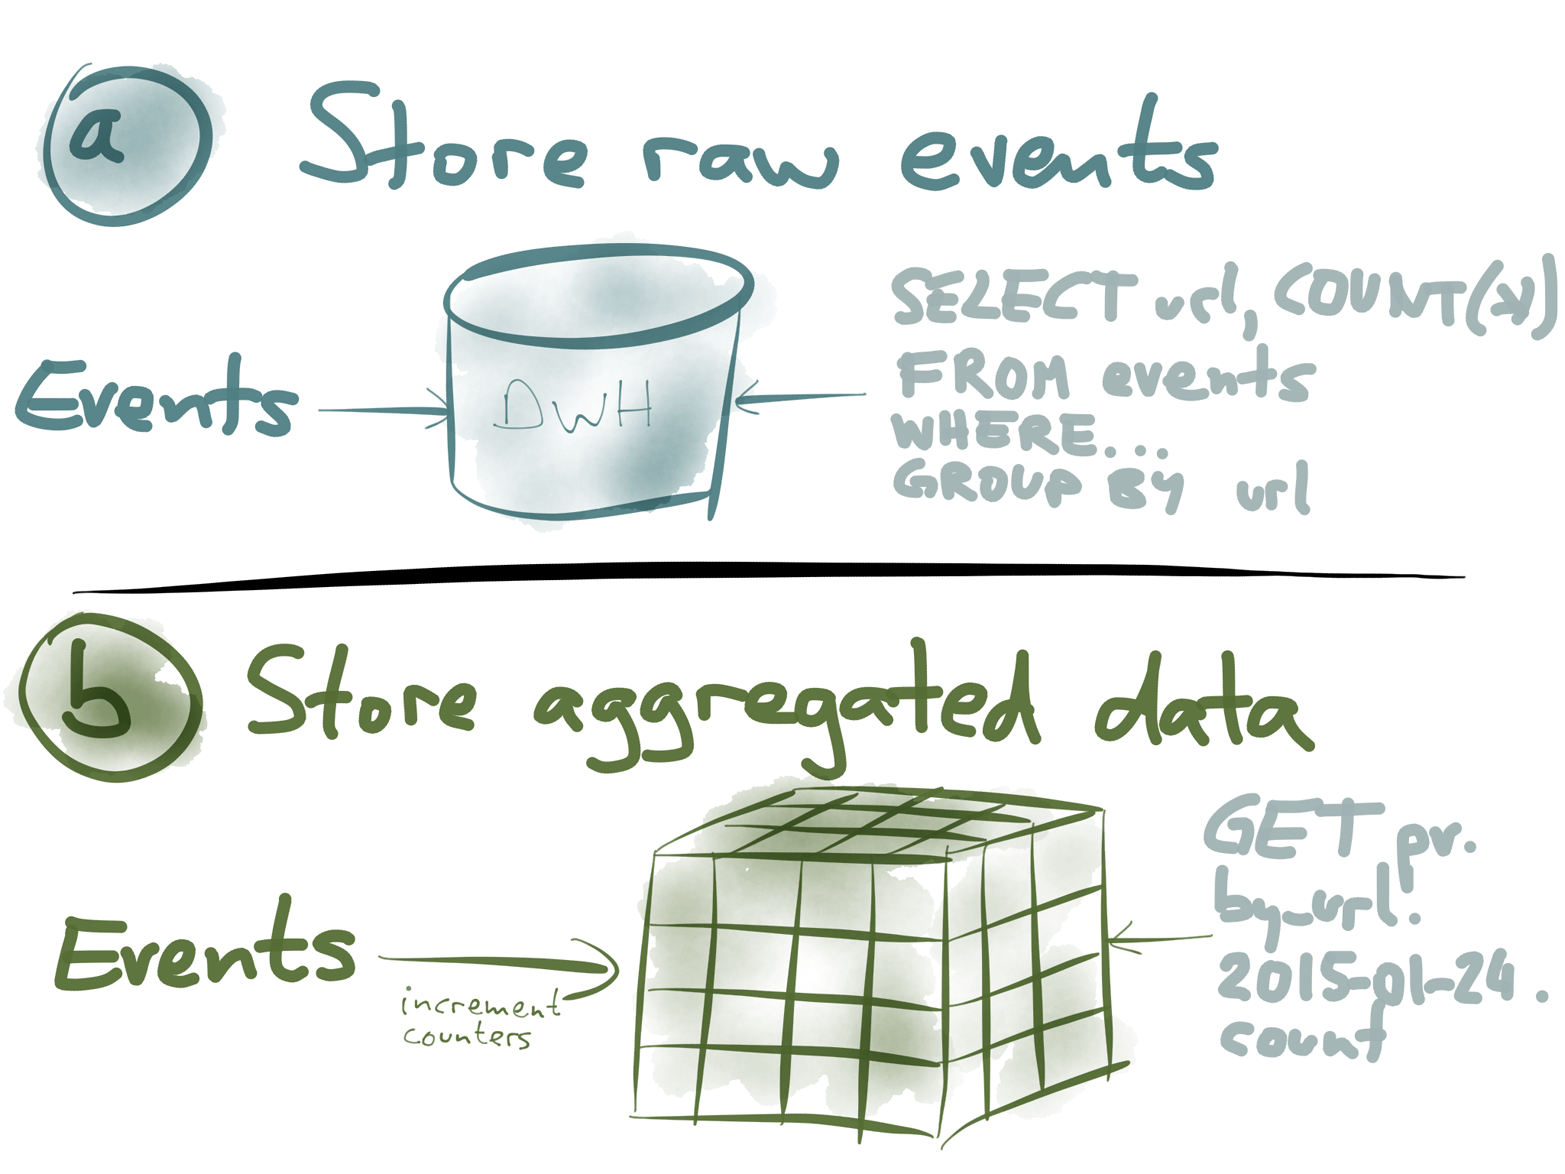 Two options for turning page view events into aggregate statistics.